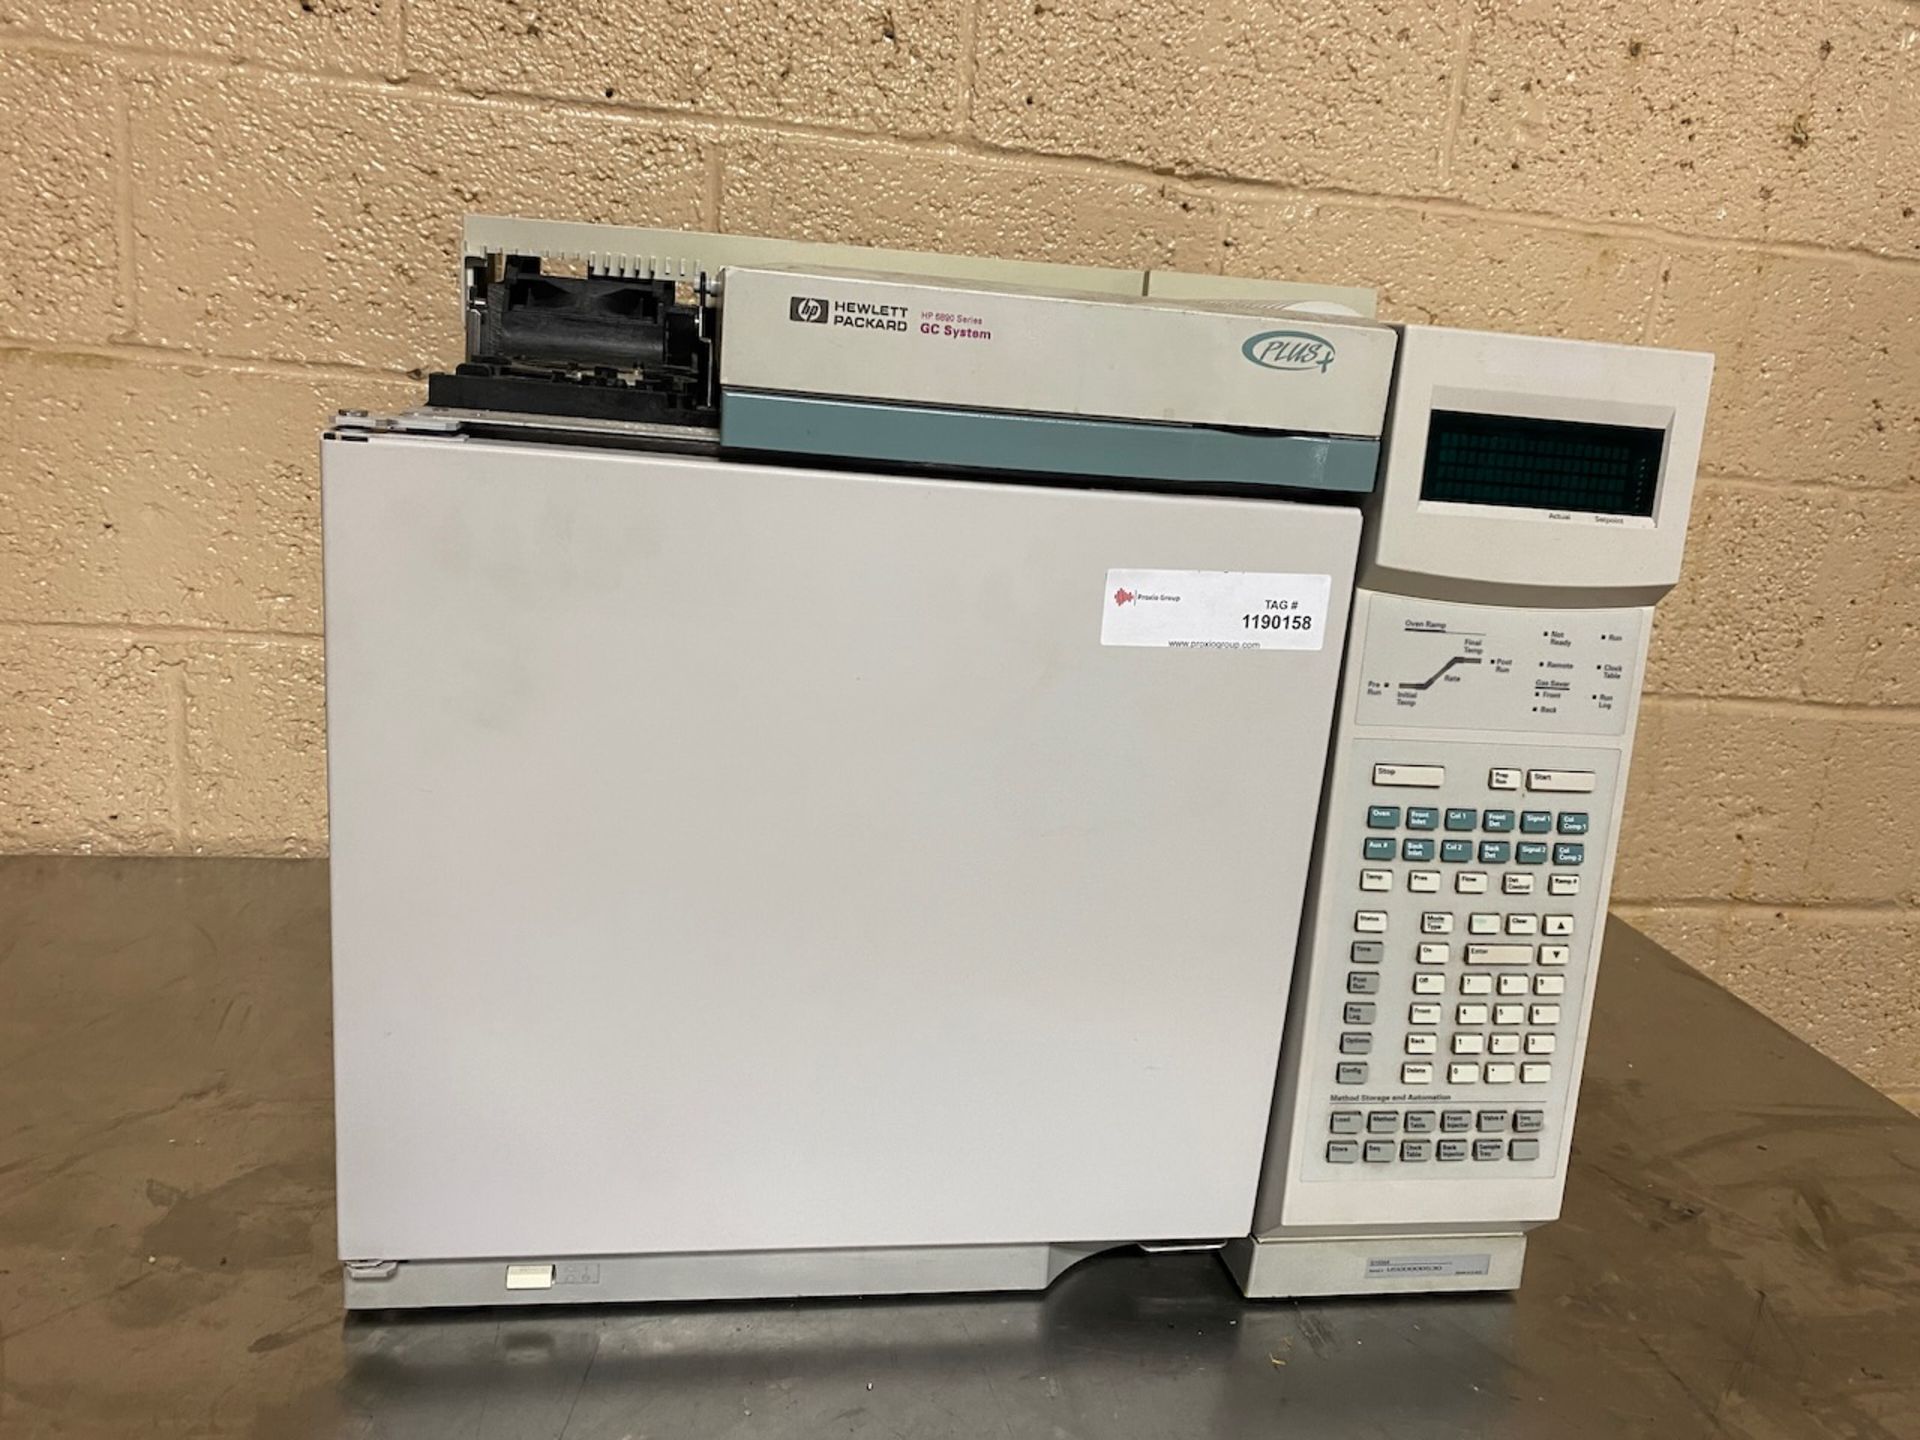 Hewlett Packard G1530A Gas Chromatograph with 6890 Plus System, S/N US00000530. {TAG:1190158}